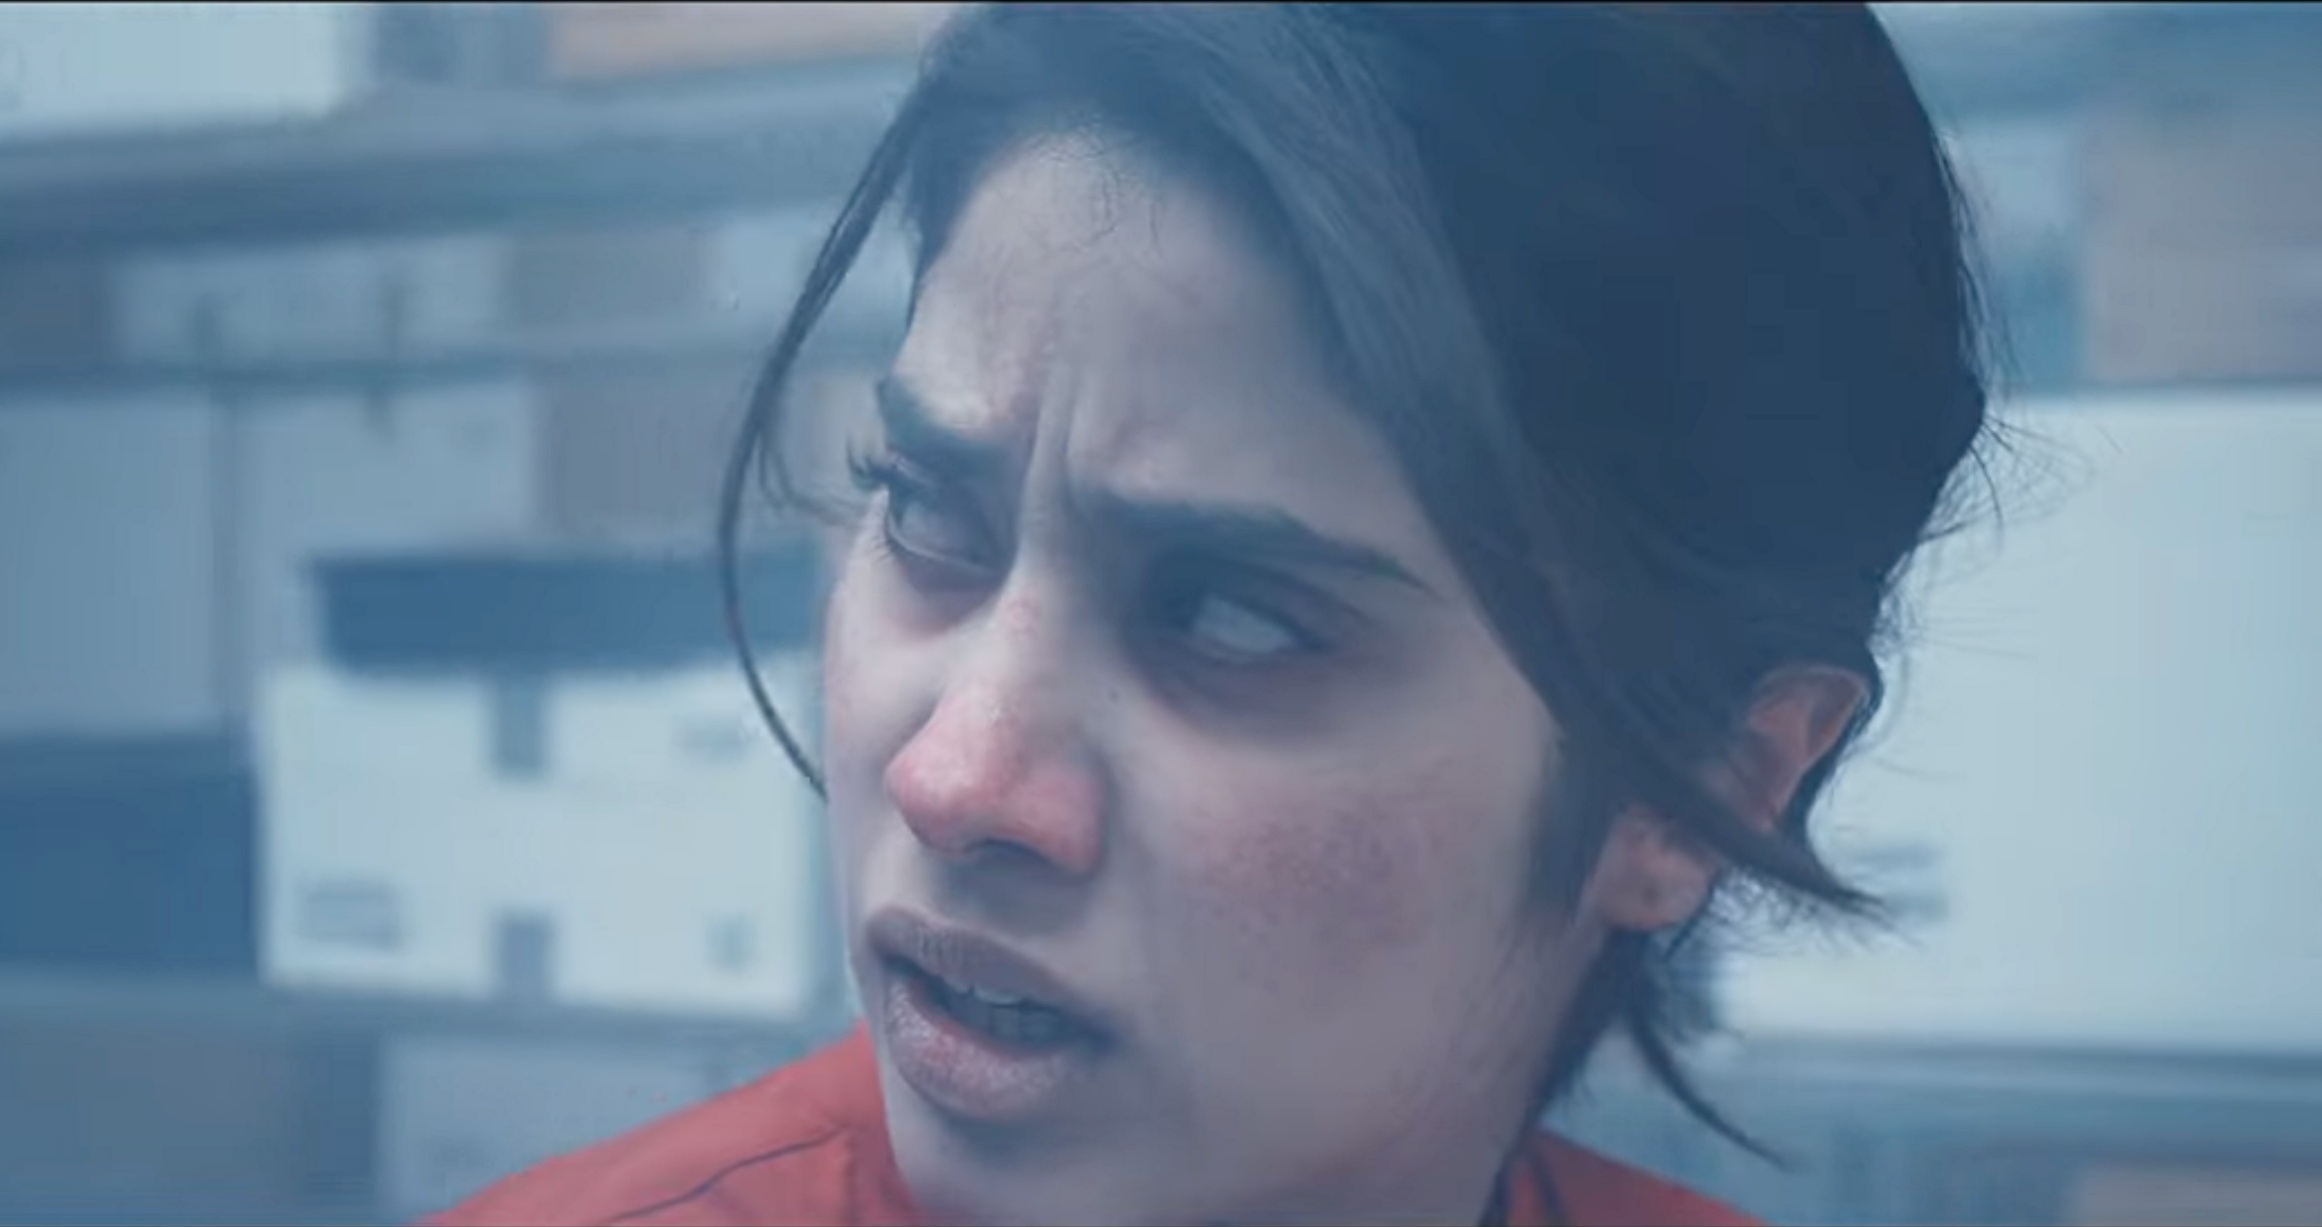 mili-teaser-janhvi-kapoor-goes-from-cool-to-cold-in-this-survival-thriller-watch